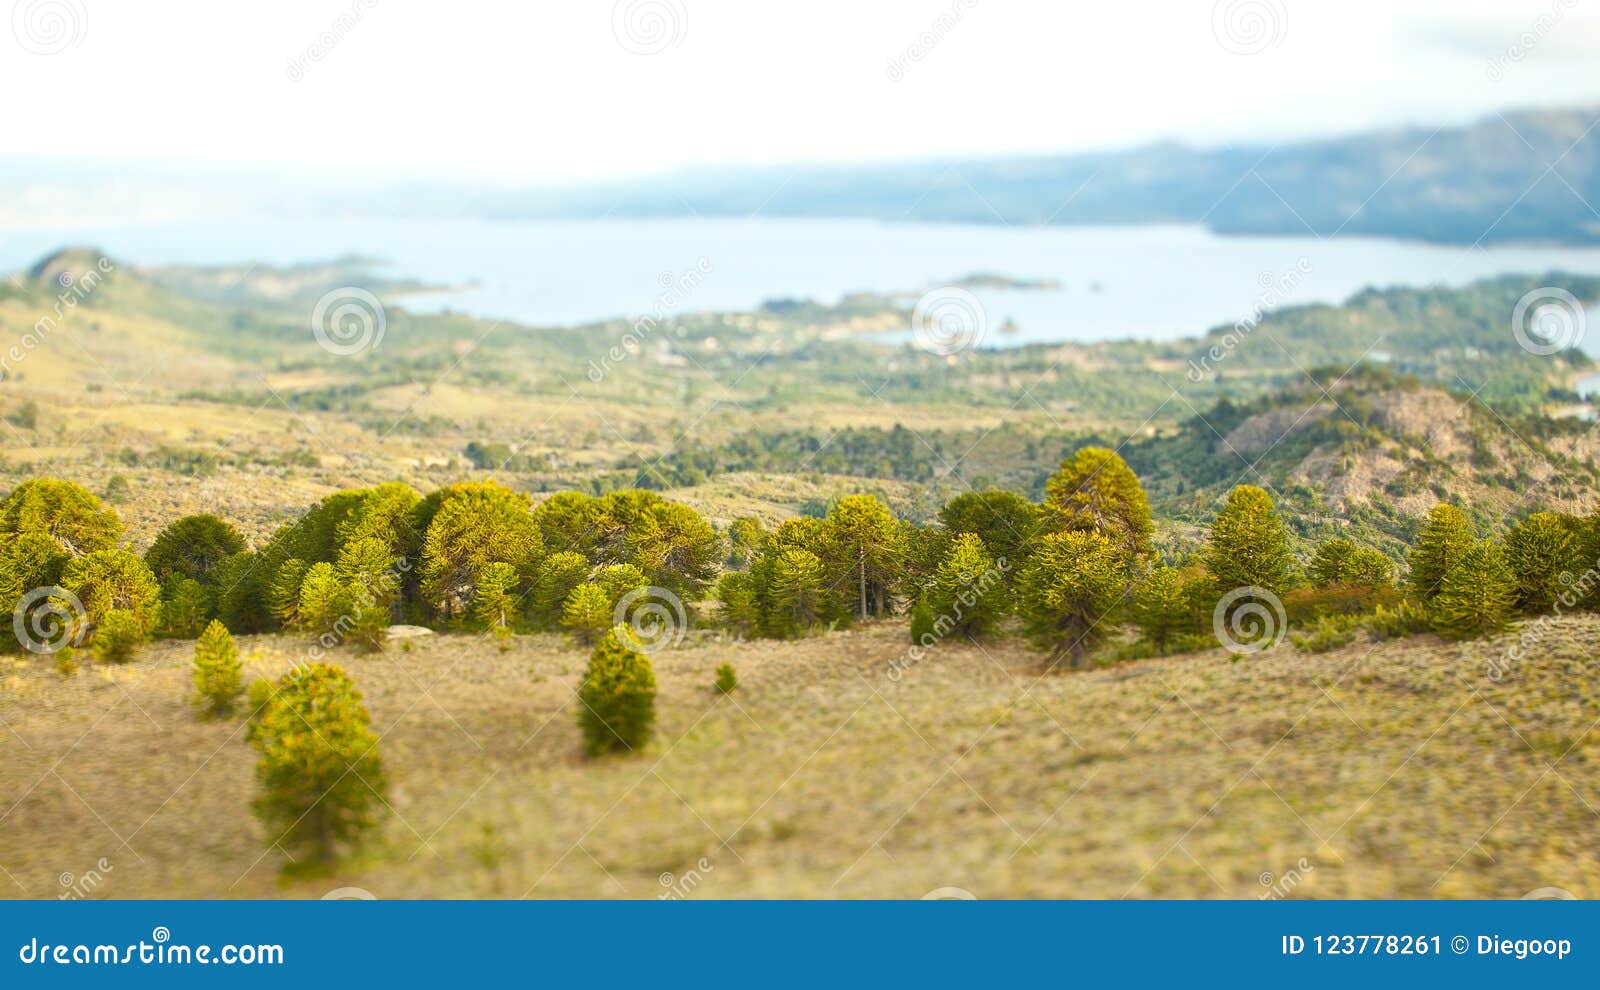 Trees Next To A Lake On A Tilt Shift Landscape Next To A Lake In The Mountains Stock Image Image Of Lake Field 123778261